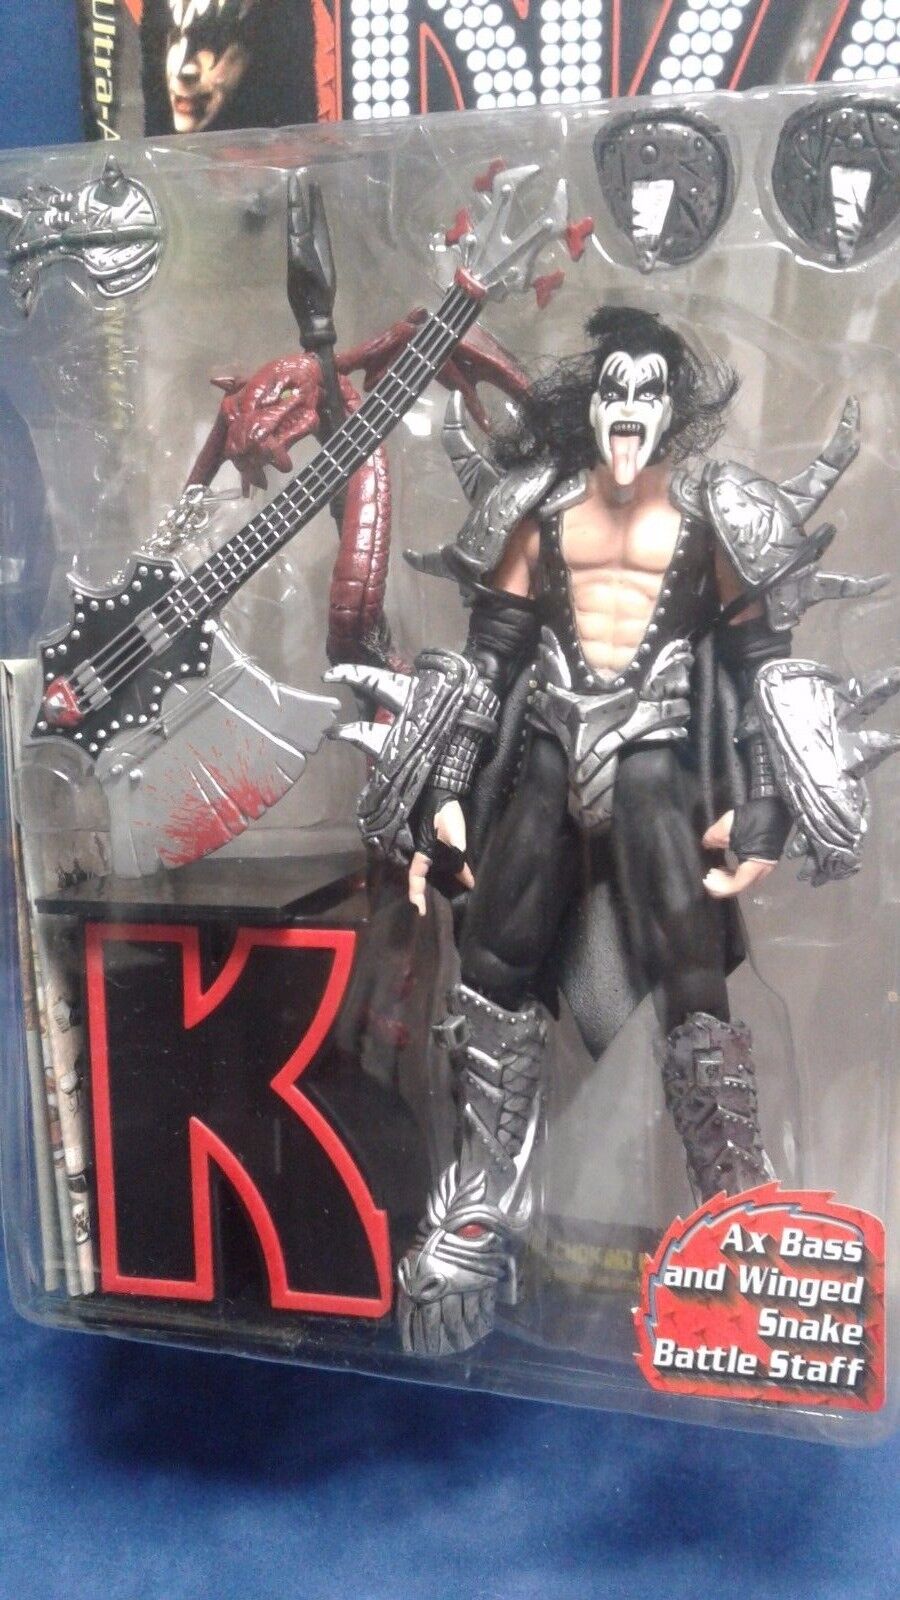 1997 KISS Ultra Action Figure with Letter Base Gene Simmons by McFarlane Toys